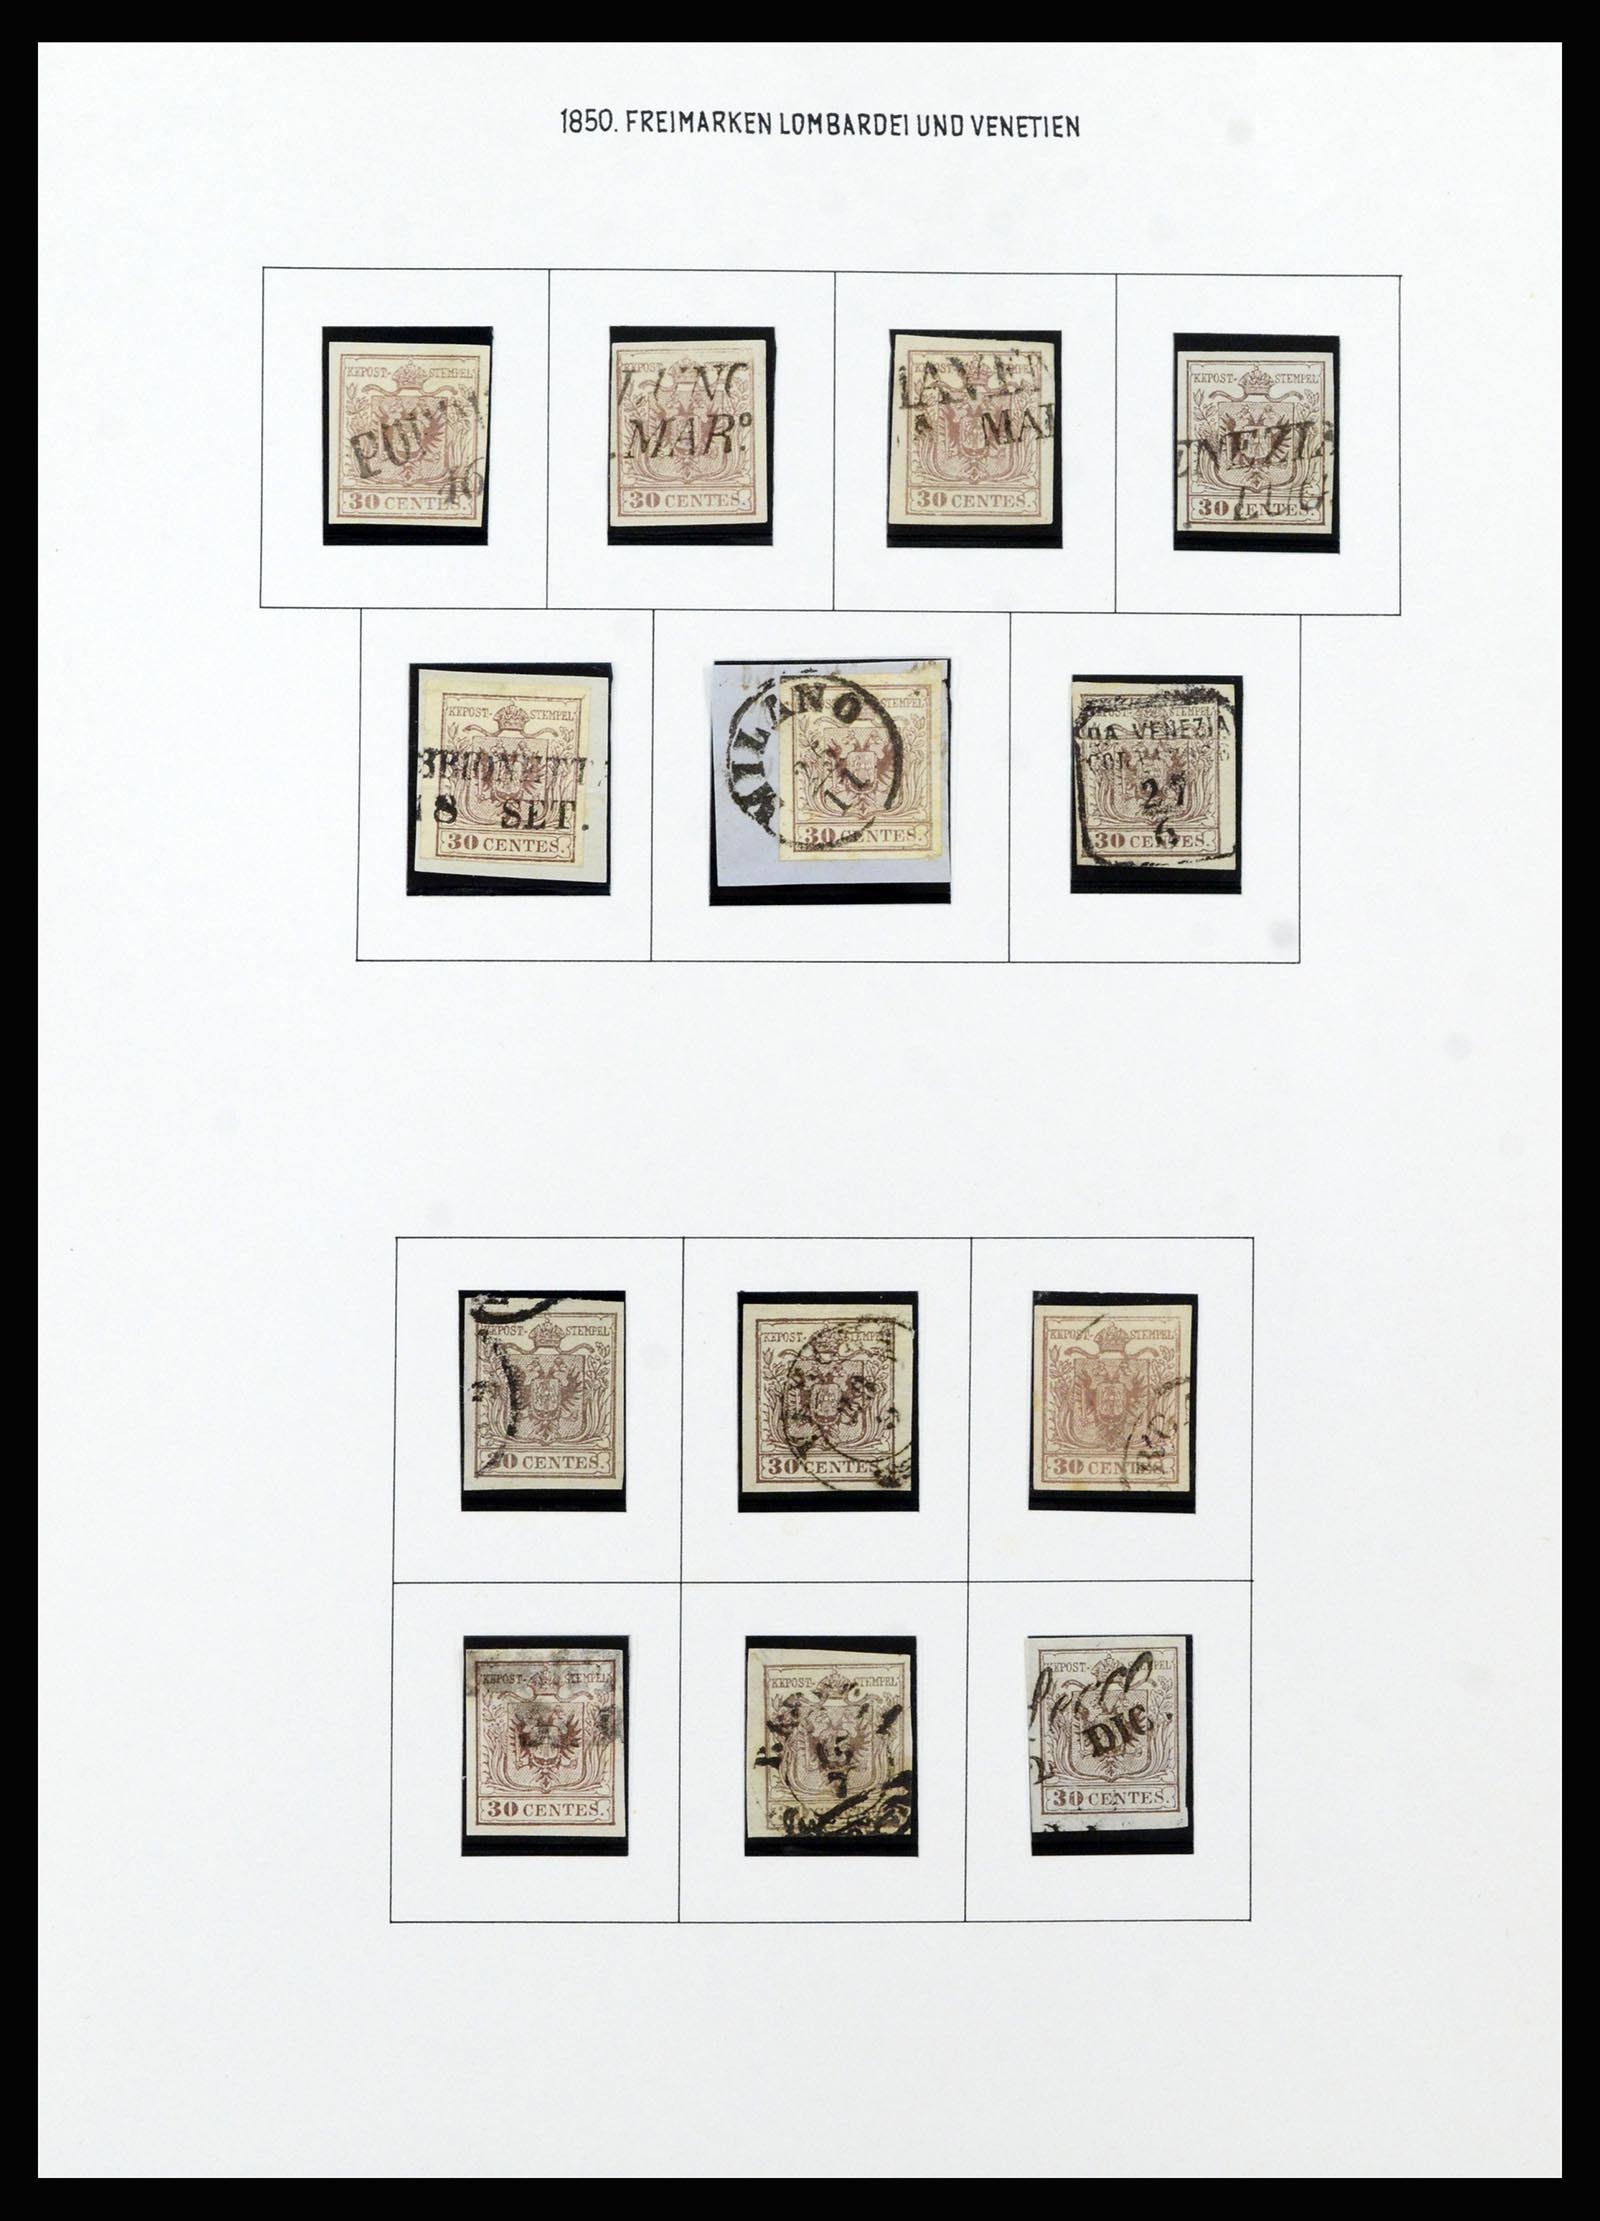 37153 010 - Stamp collection 37153 Lombardy-Venetia 1850-1864.